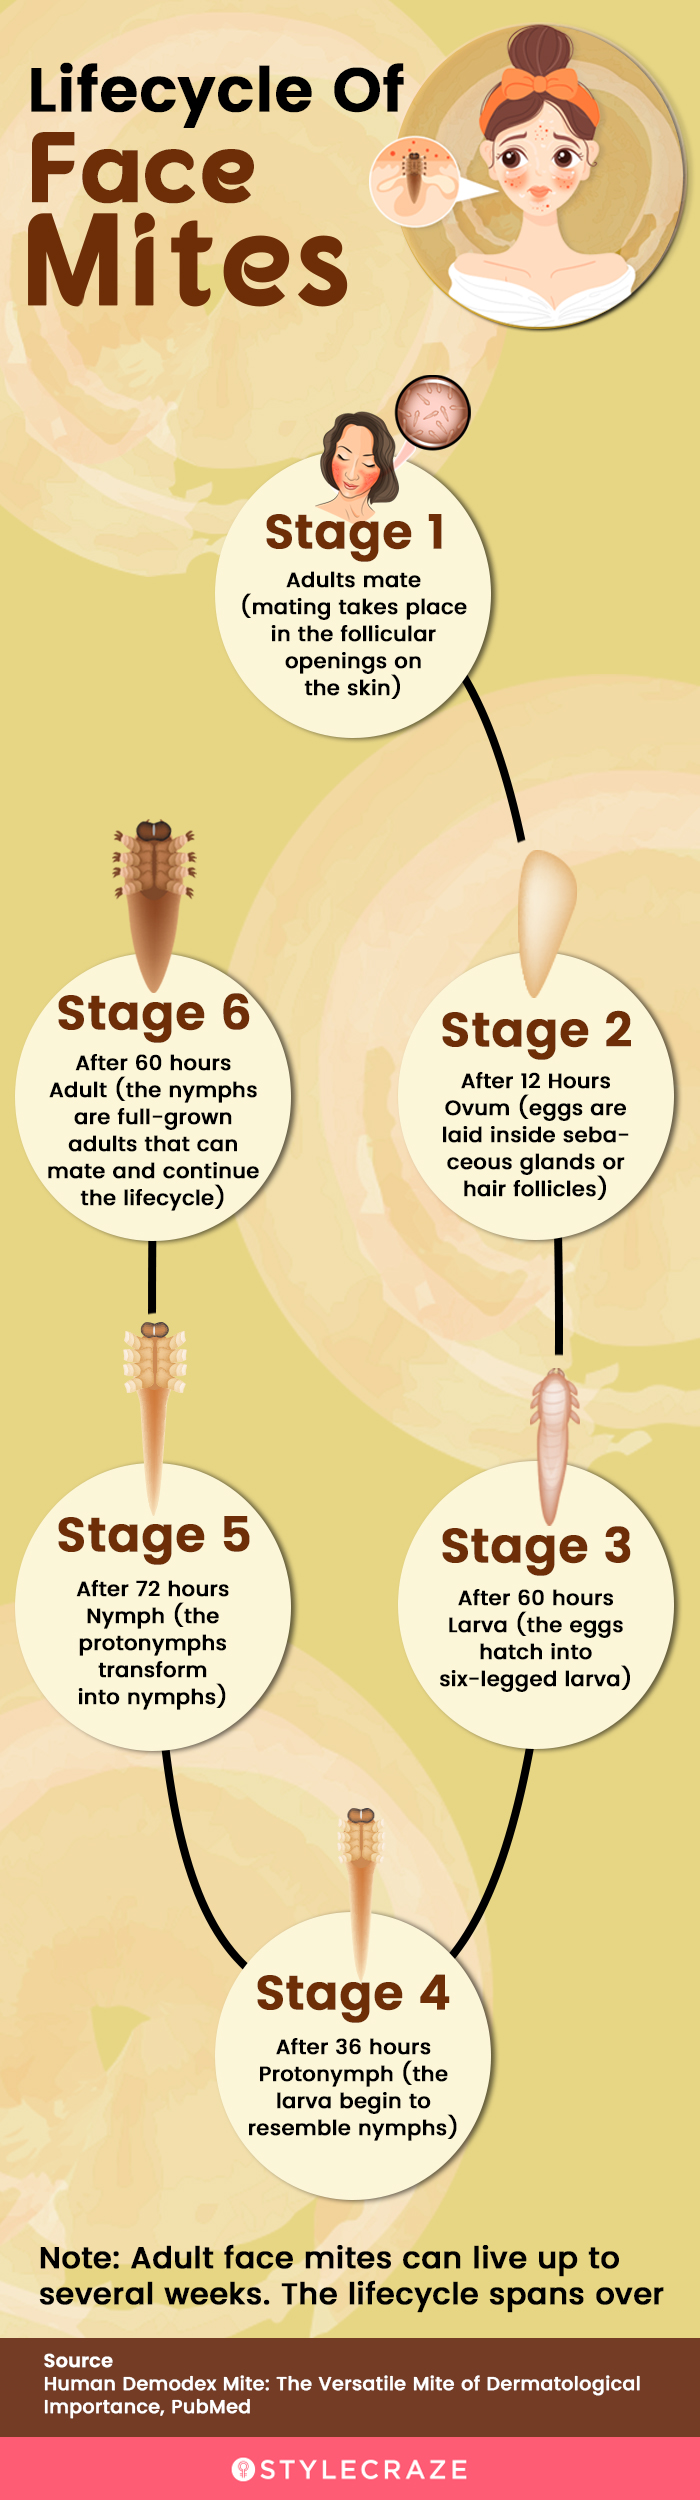 lifecycle of face mites [infographic]